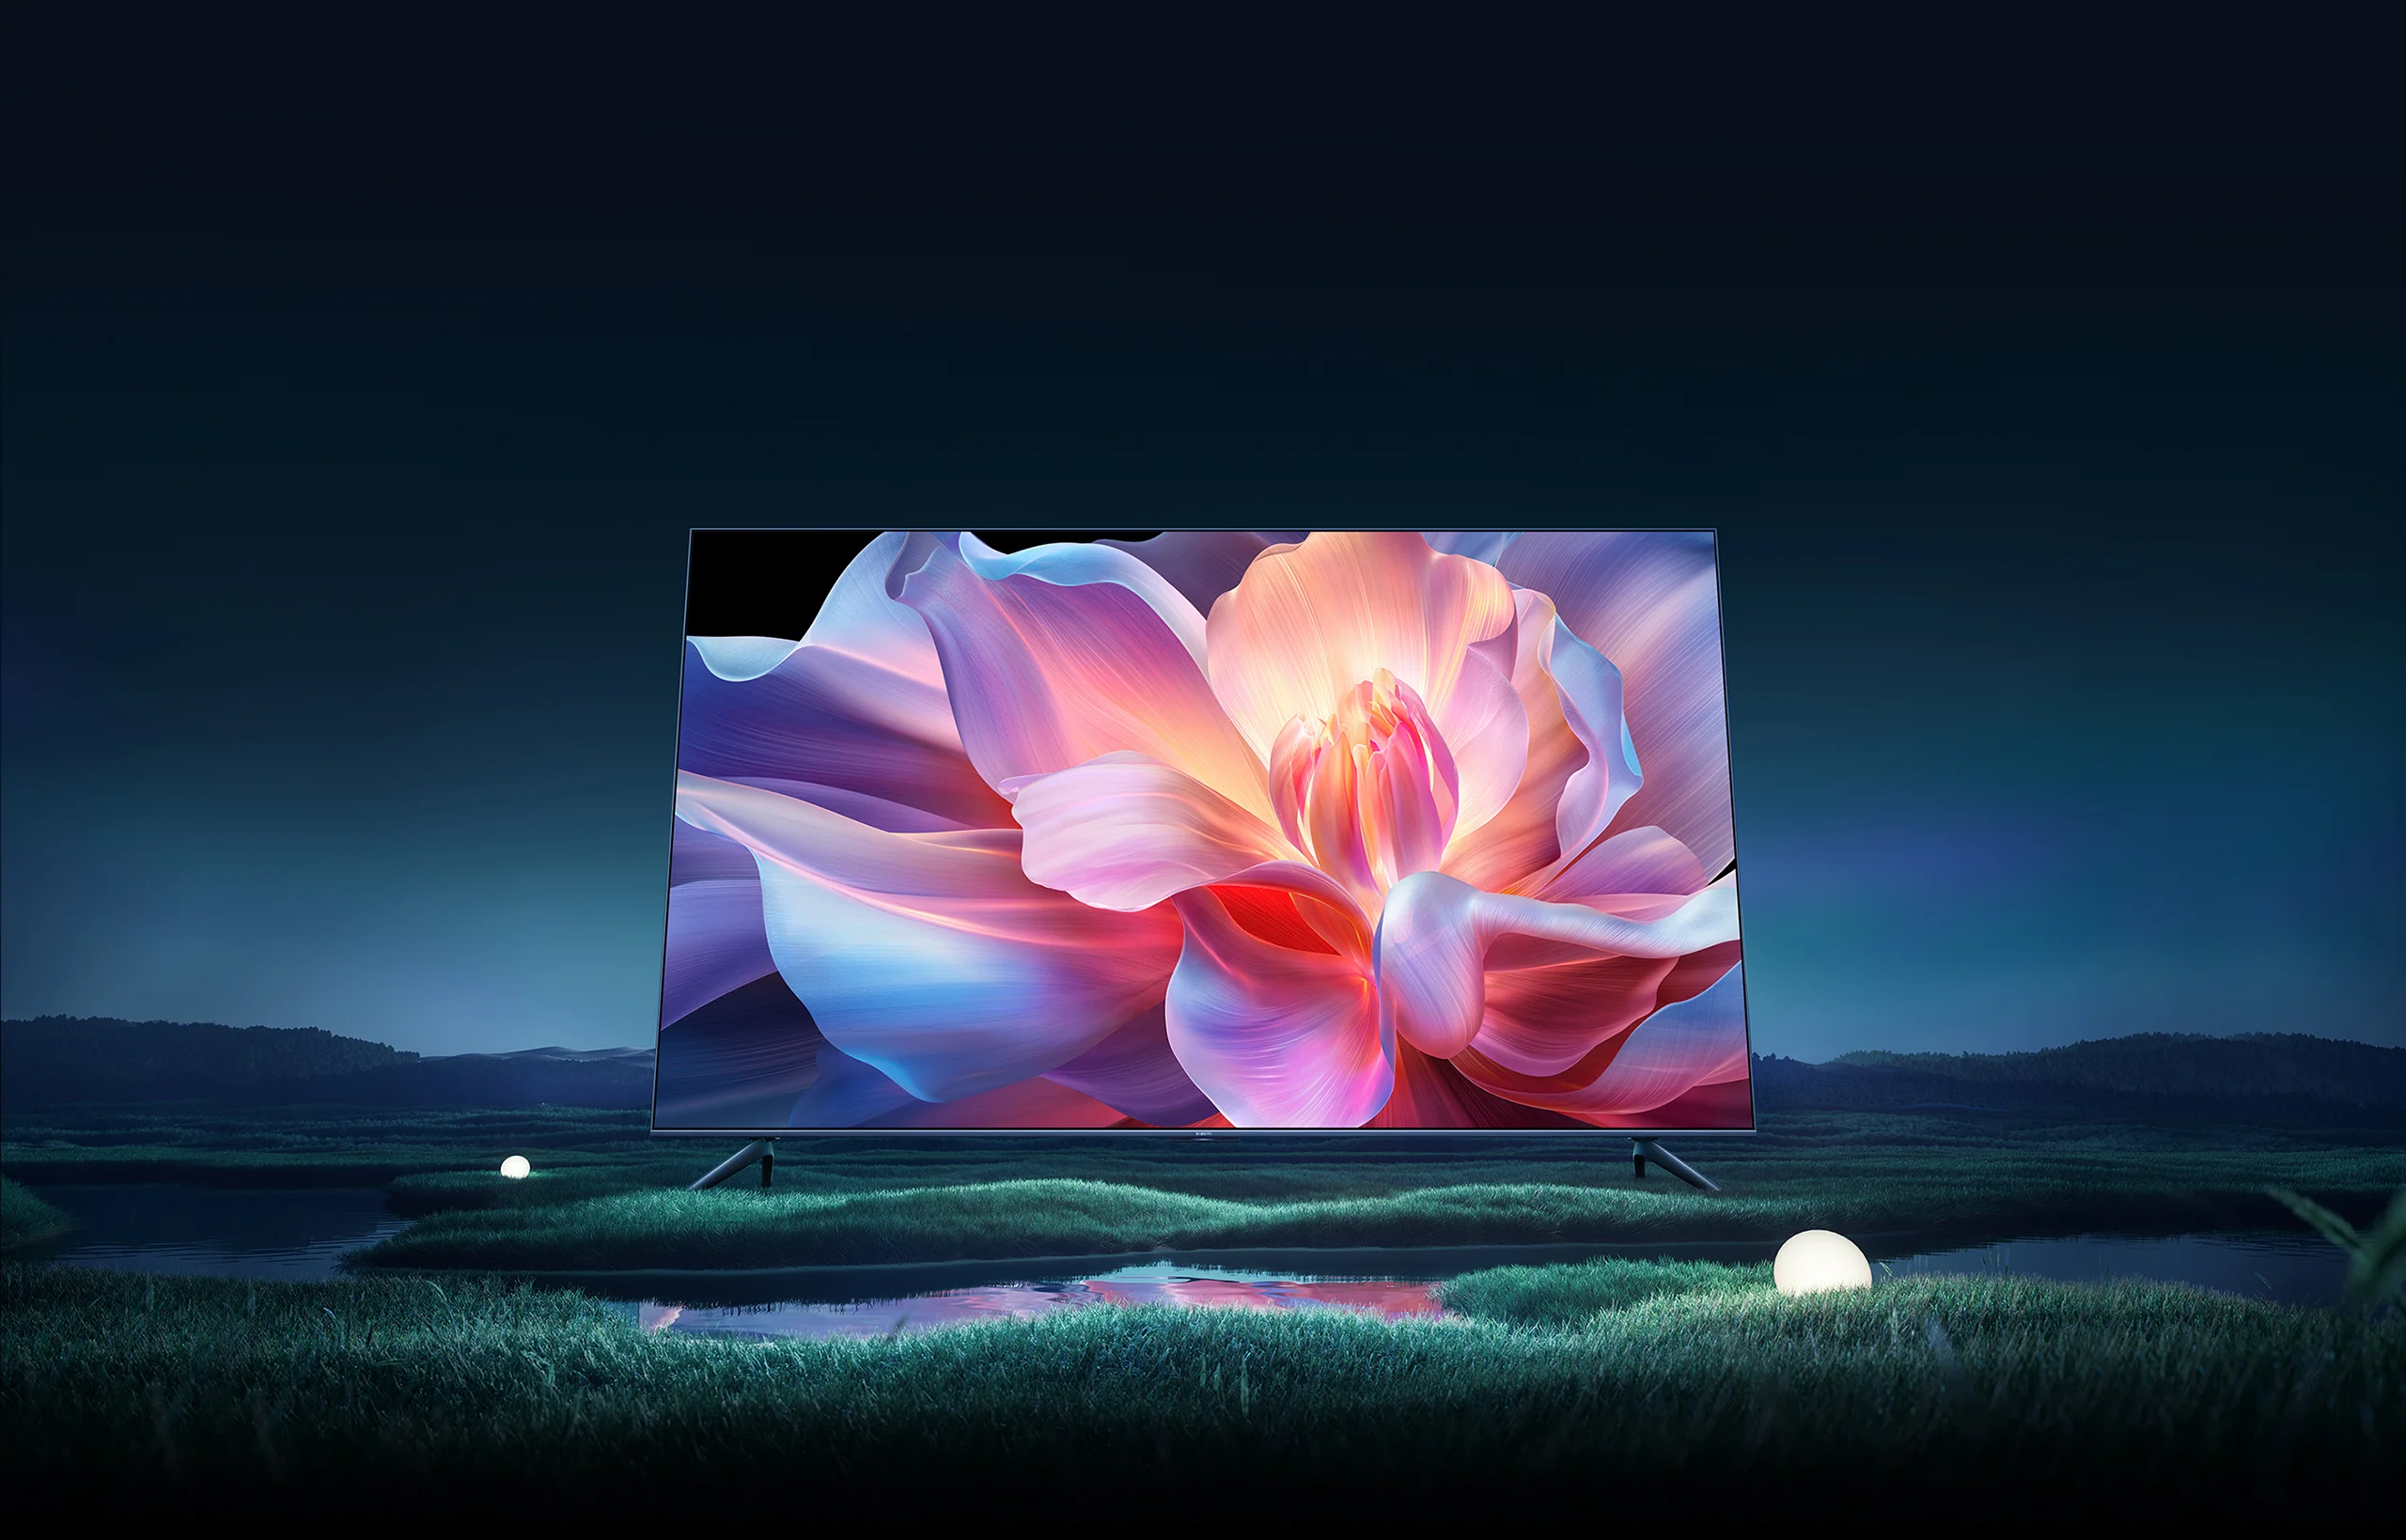 Xiaomi TV Max 100 with 4K resolution & 120Hz refresh rate introduced globally